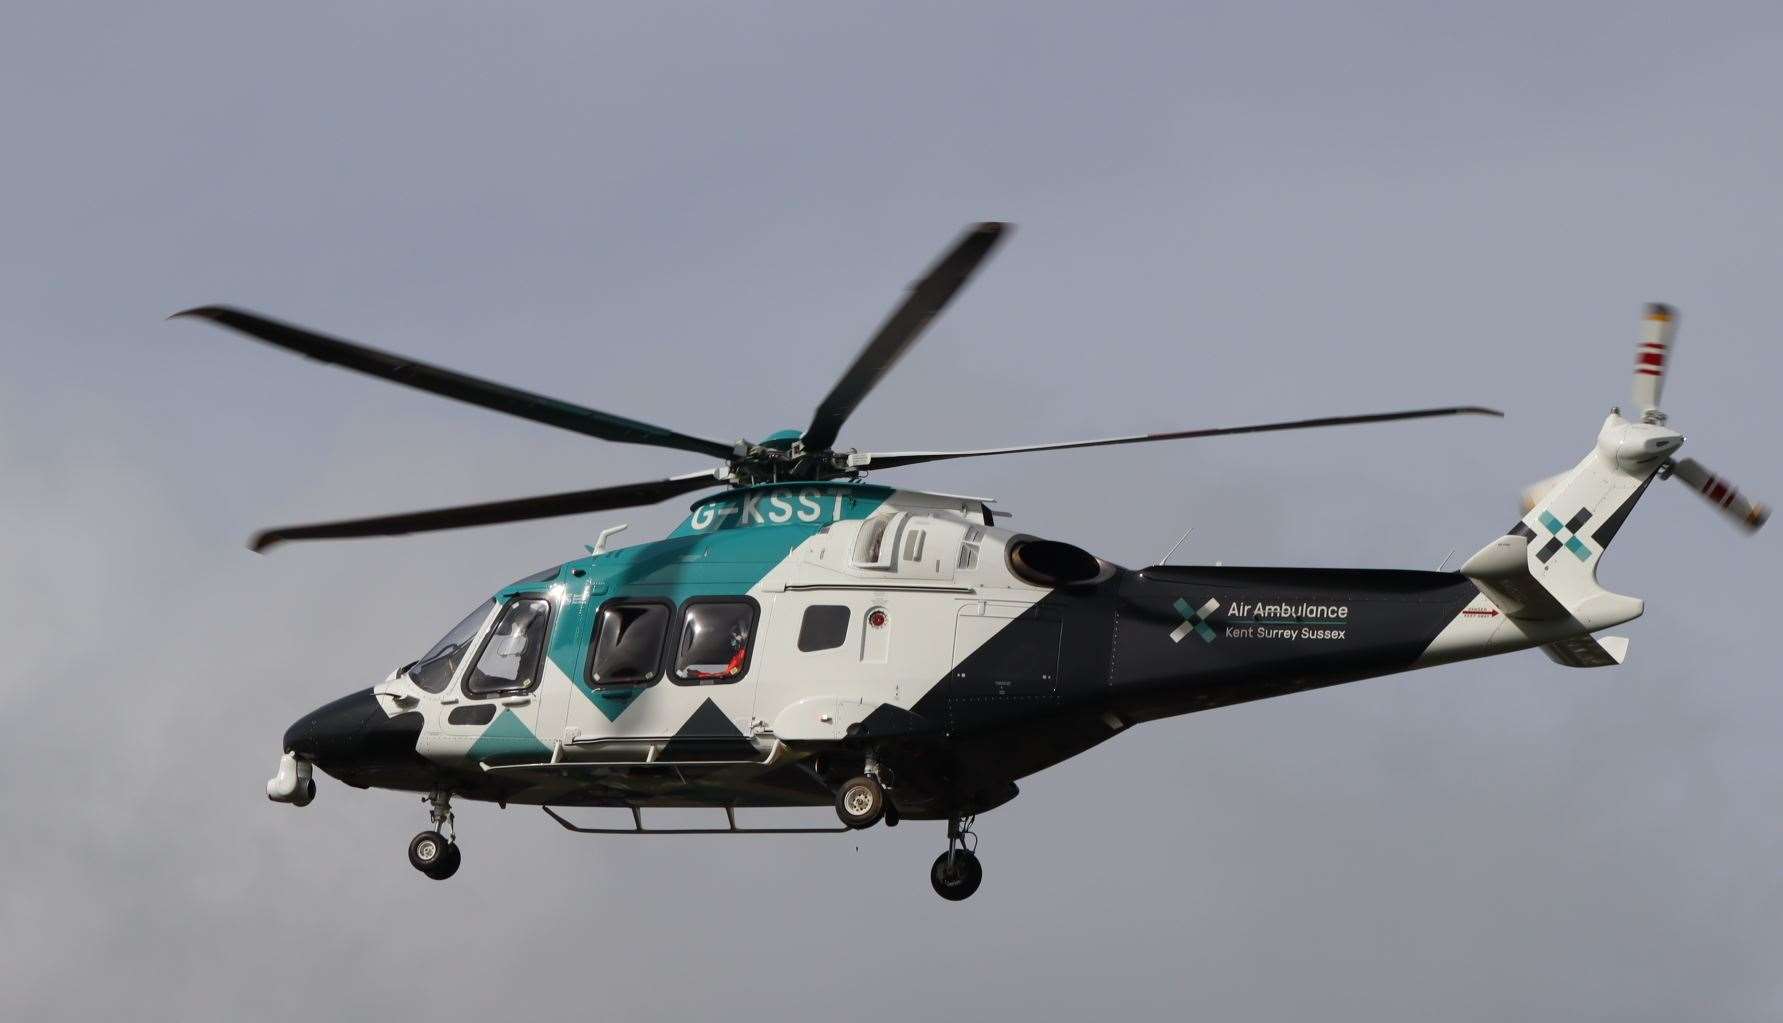 The child was flown to a London hospital